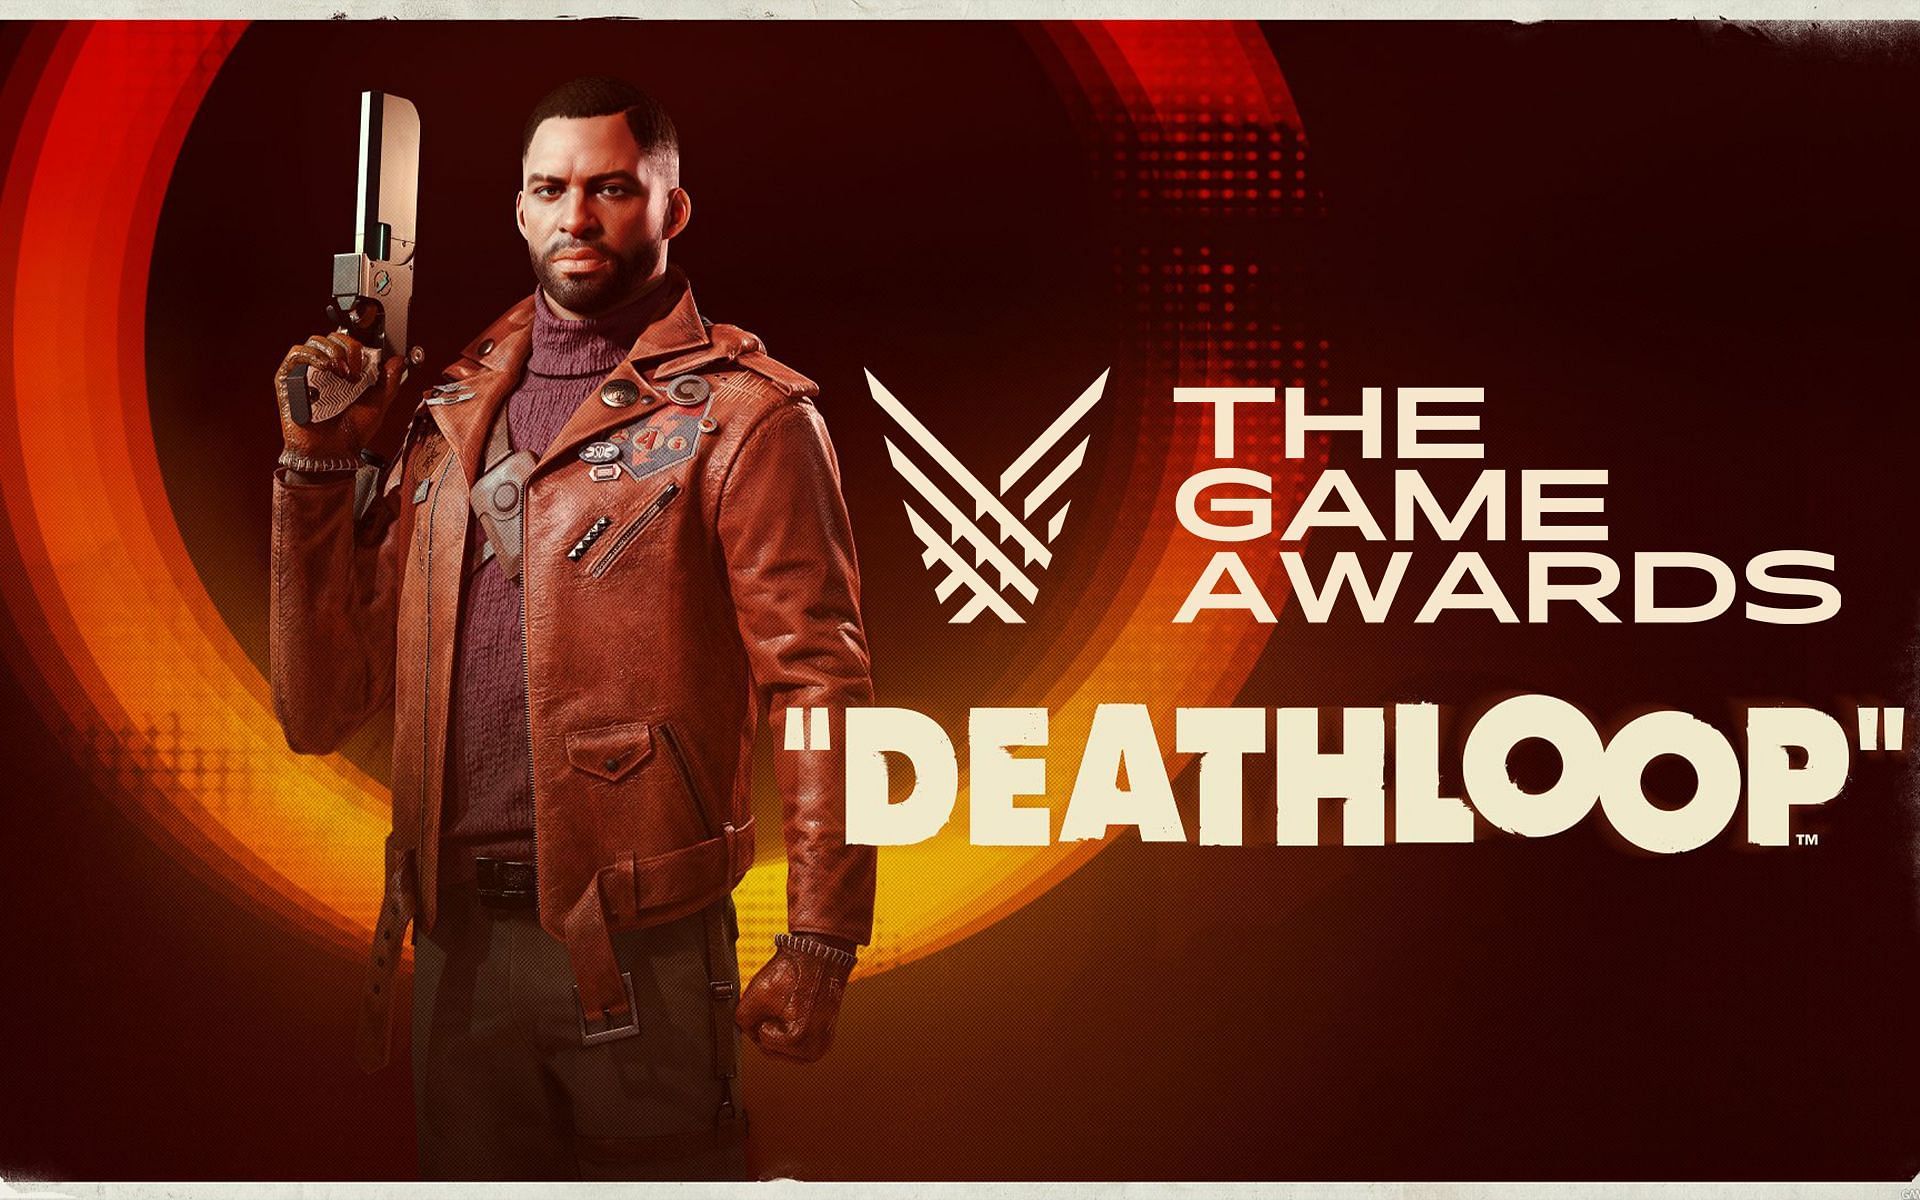 Which nominations did Deathloop secure in The Game Awards 2021 (Image by Sportskeeda)